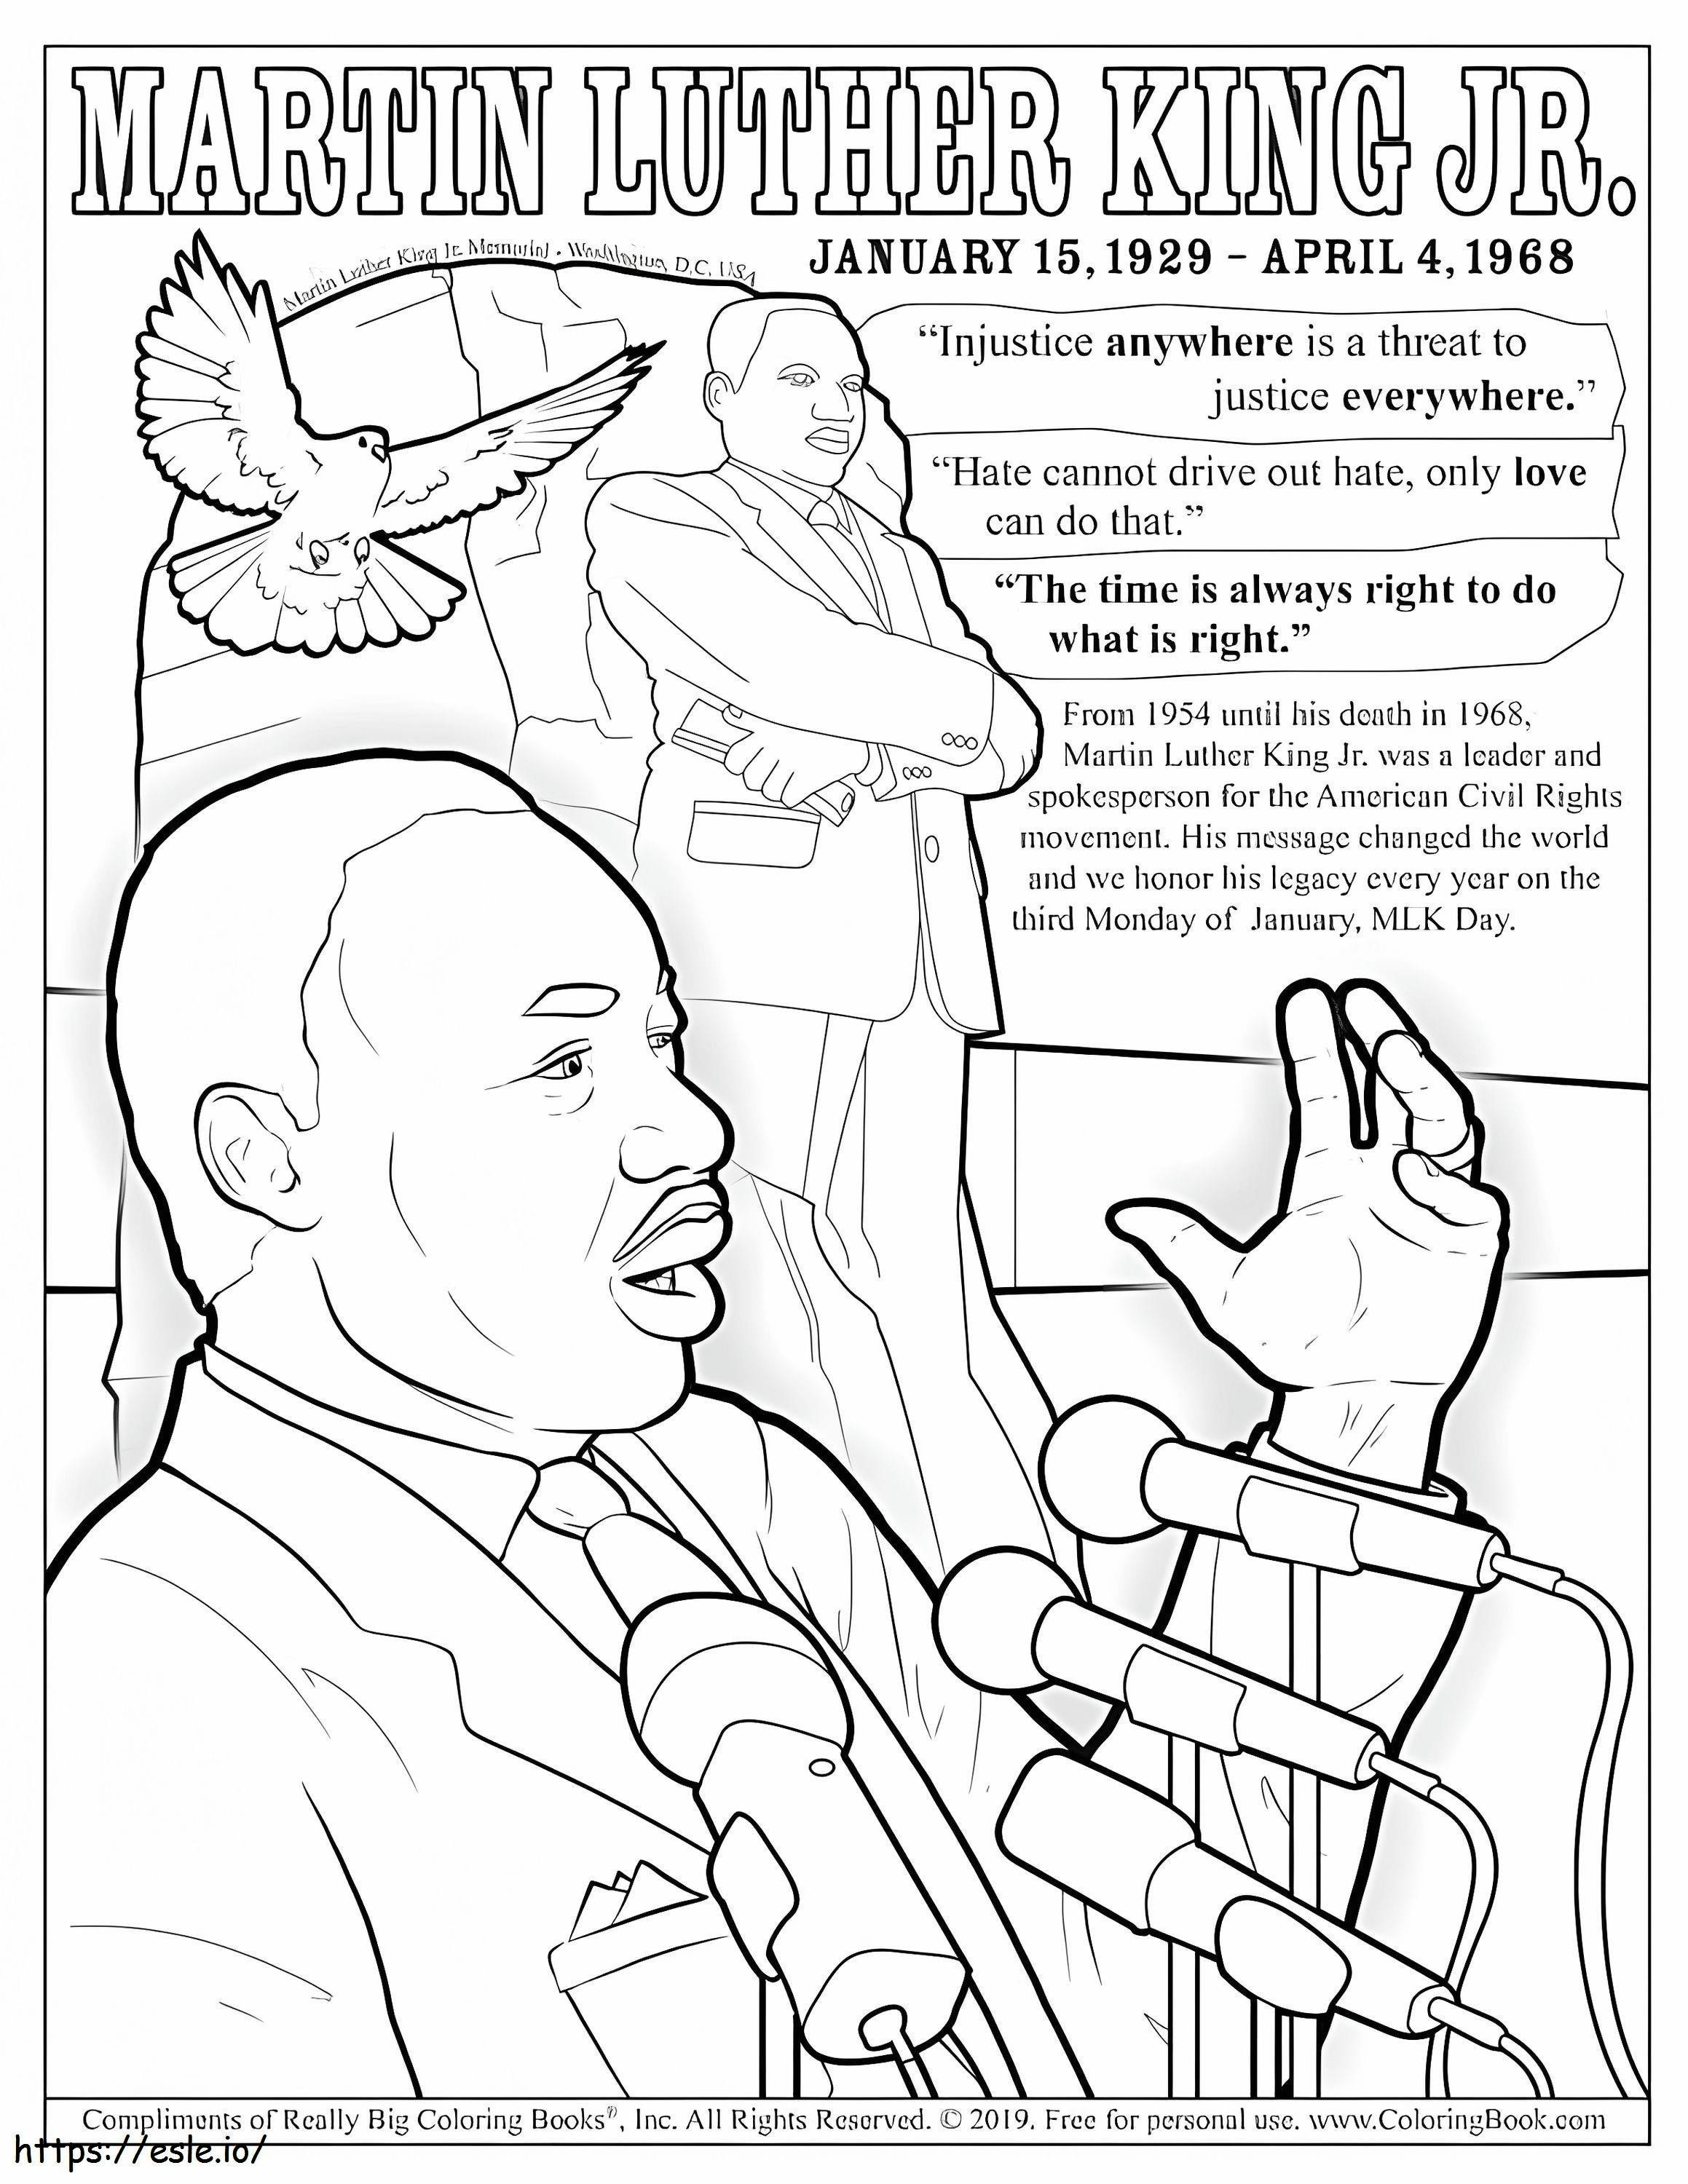 Martin Luther King Jr coloring page